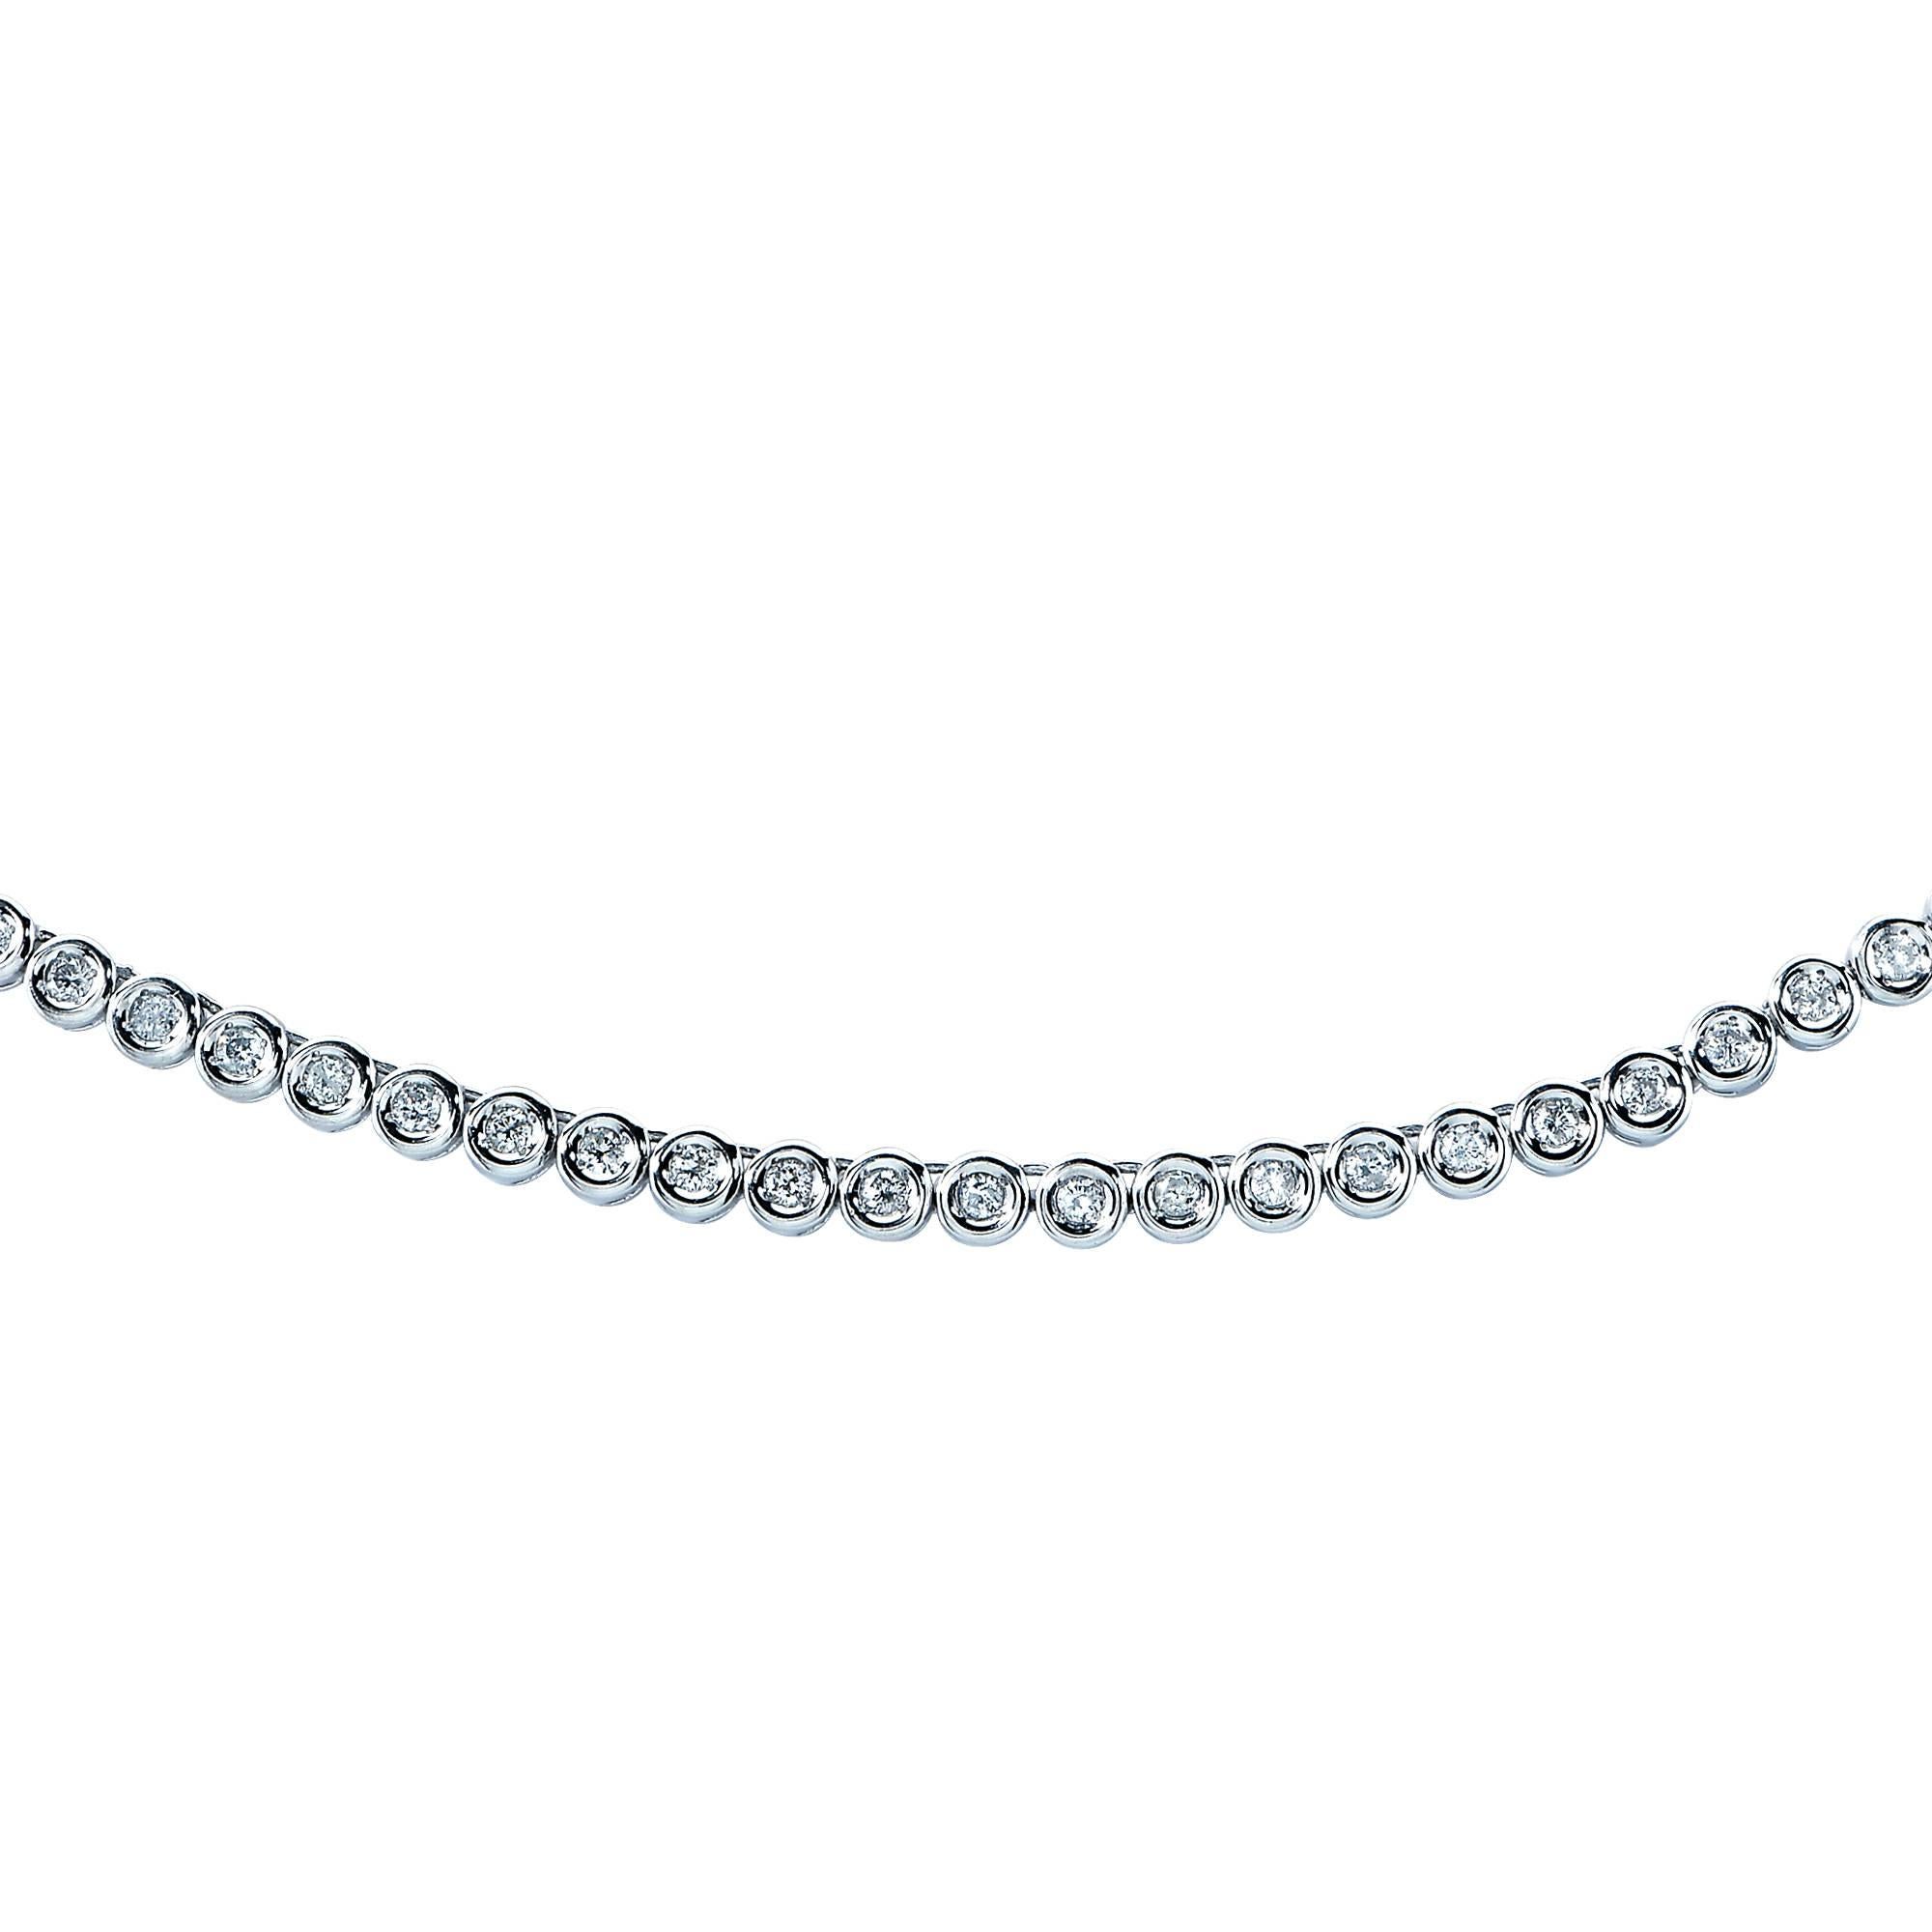 Platinum diamond necklace featuring 145 round brilliant cut diamonds weighing 3.28cts G color I1 clarity.

The necklace measures 18 inches in length.
It is stamped and/or tested as platinum.
The metal weight is 31.87 grams.

This diamond necklace is